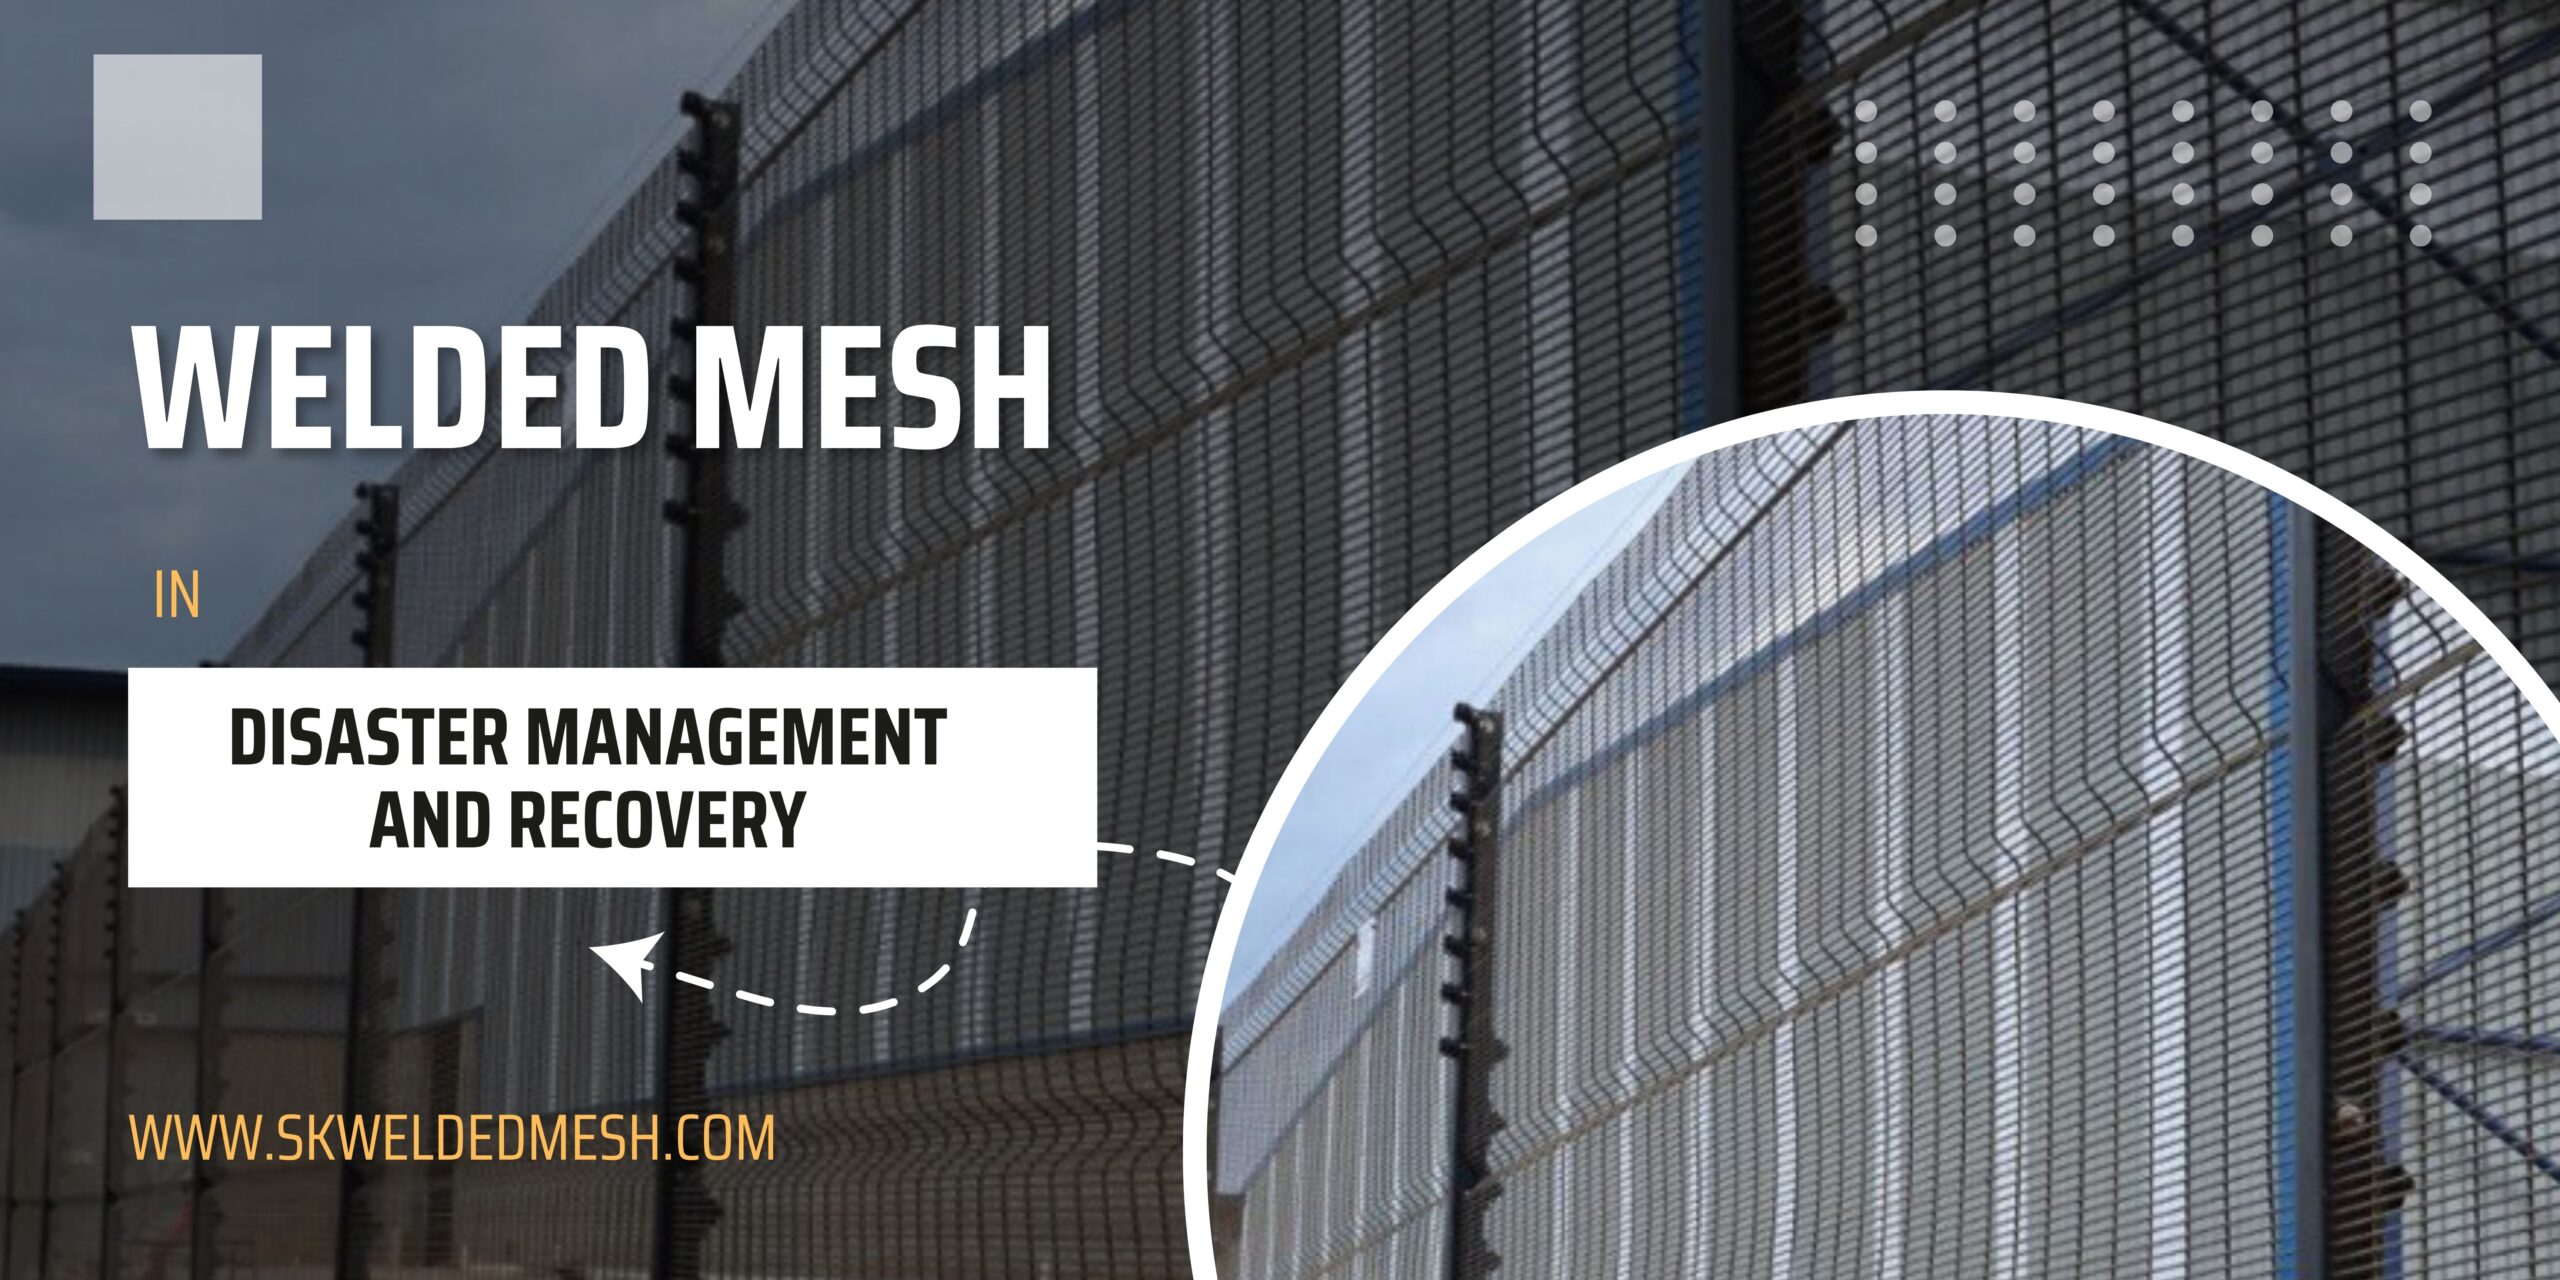 welded mesh in disaster management and recovery